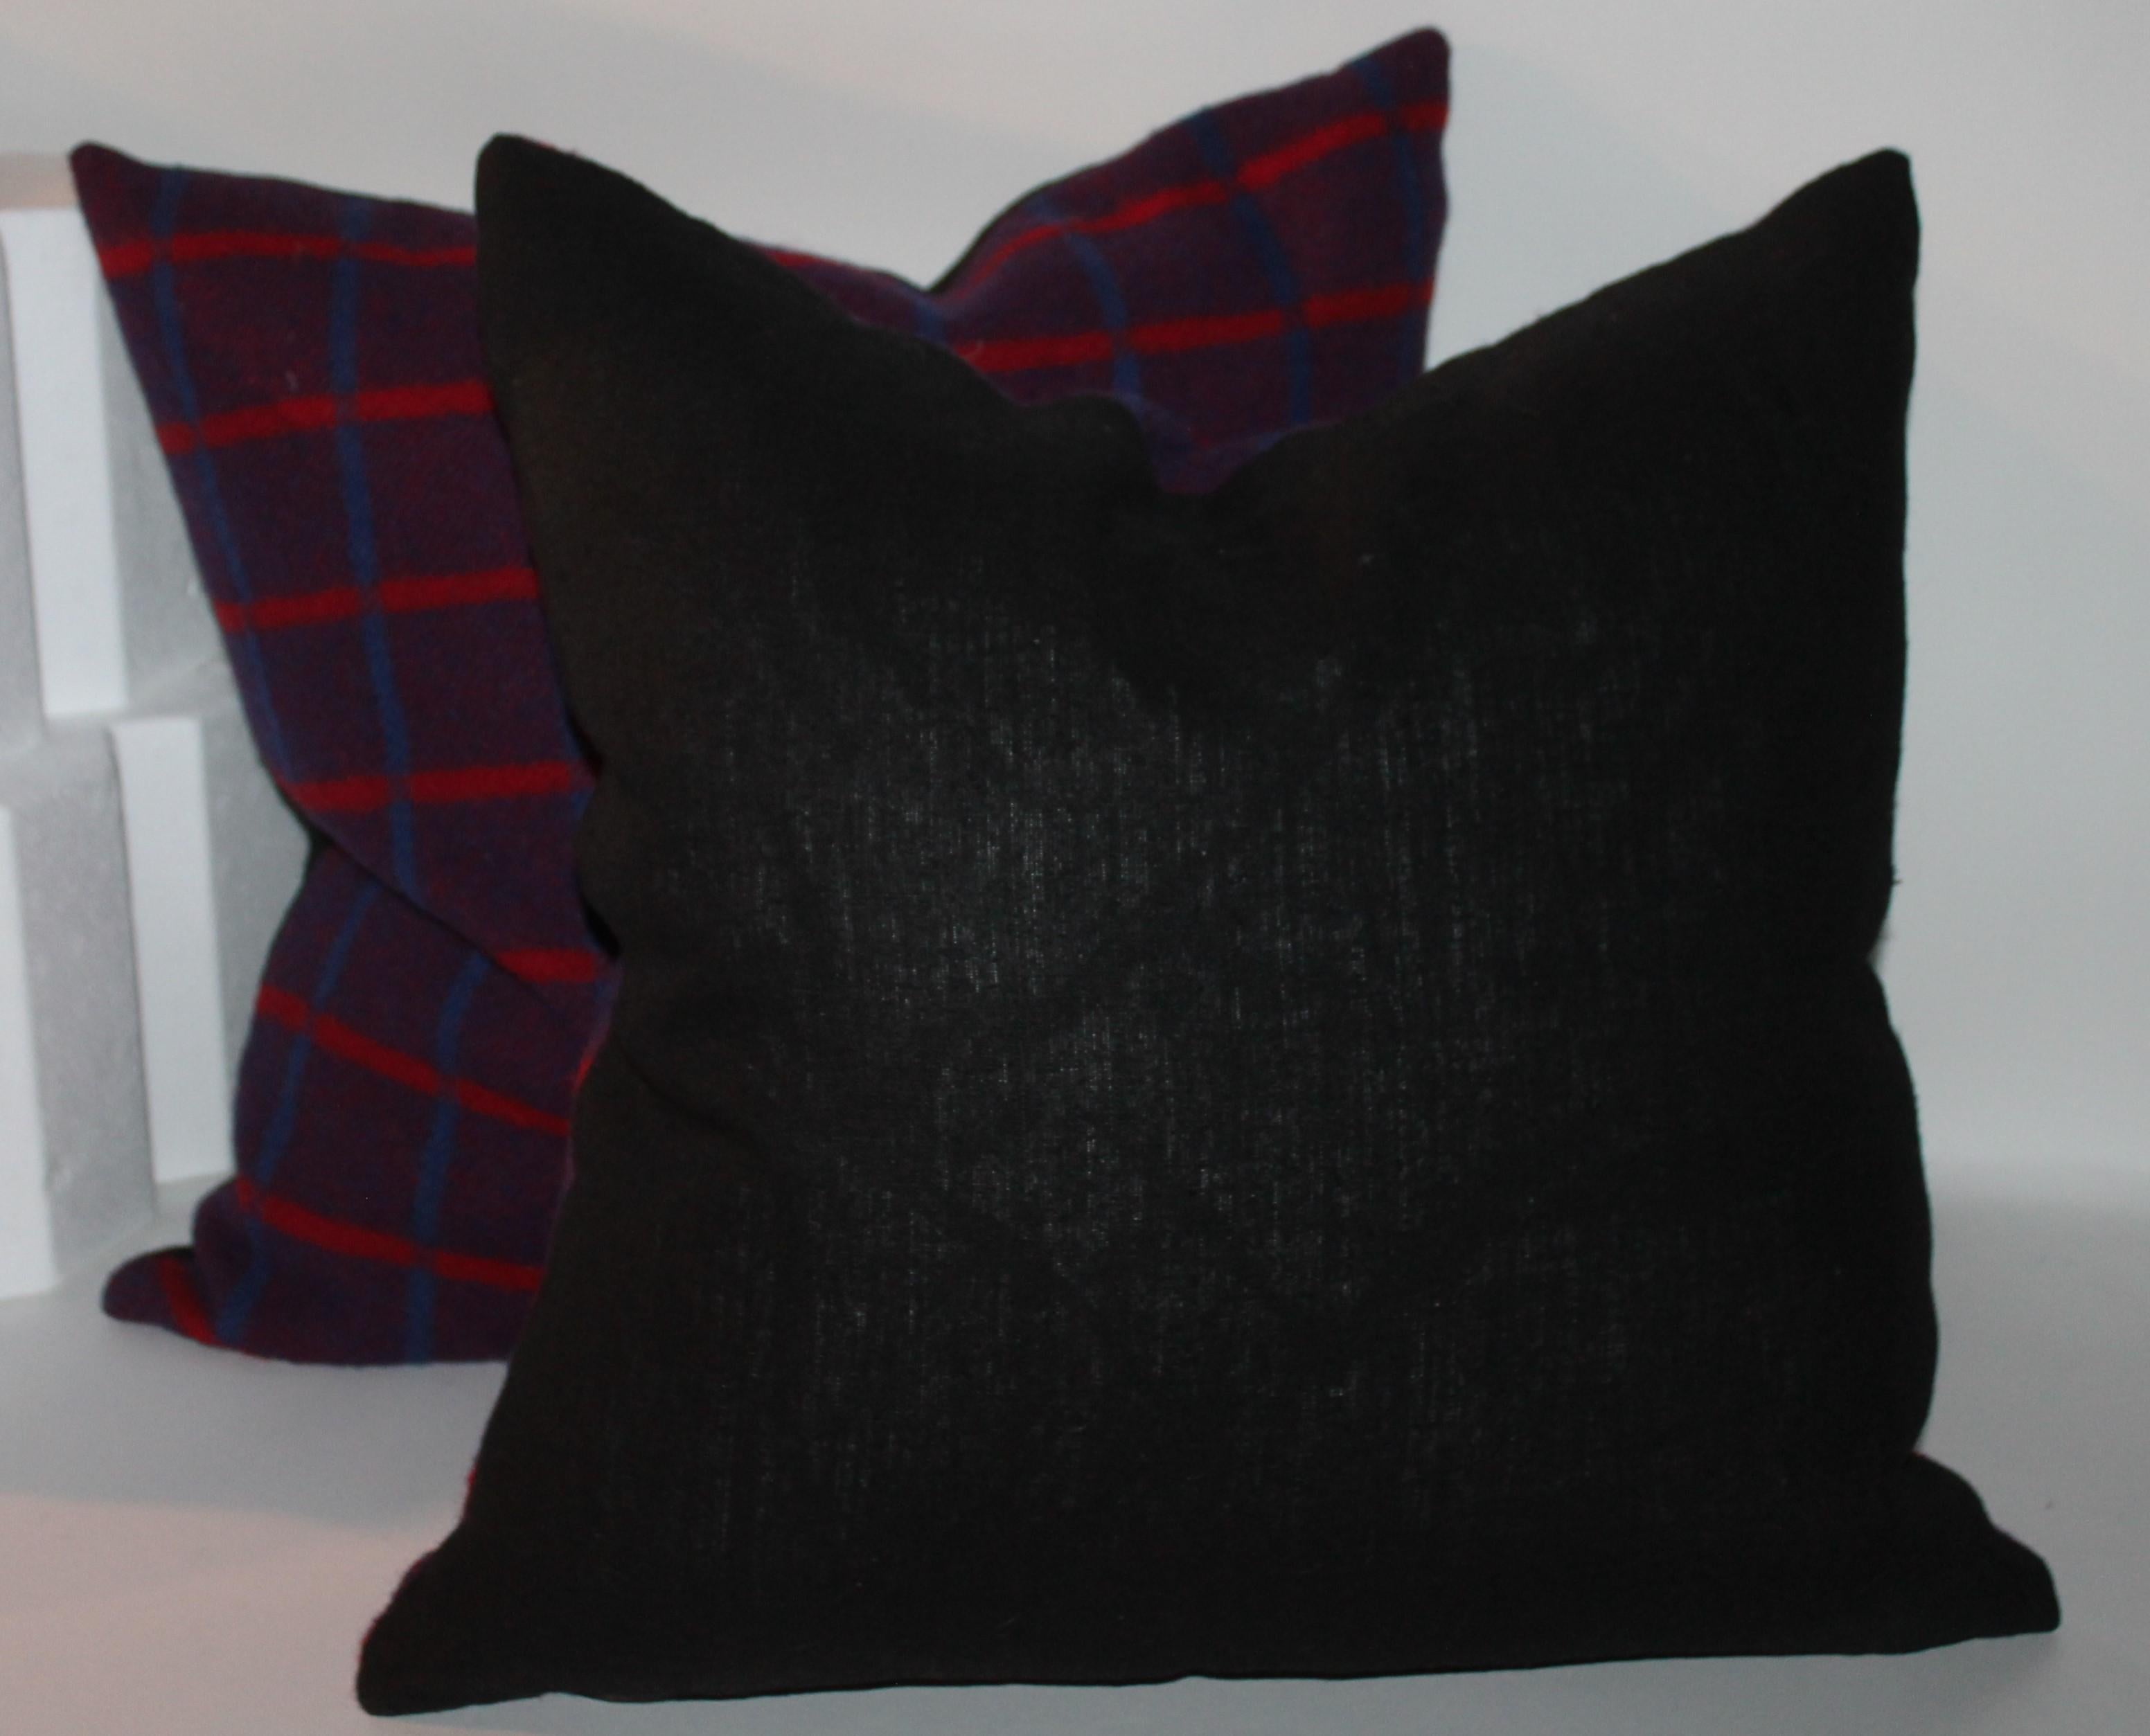 Vintage Wool Plaid Blanket Pillows, Pair In Excellent Condition For Sale In Los Angeles, CA